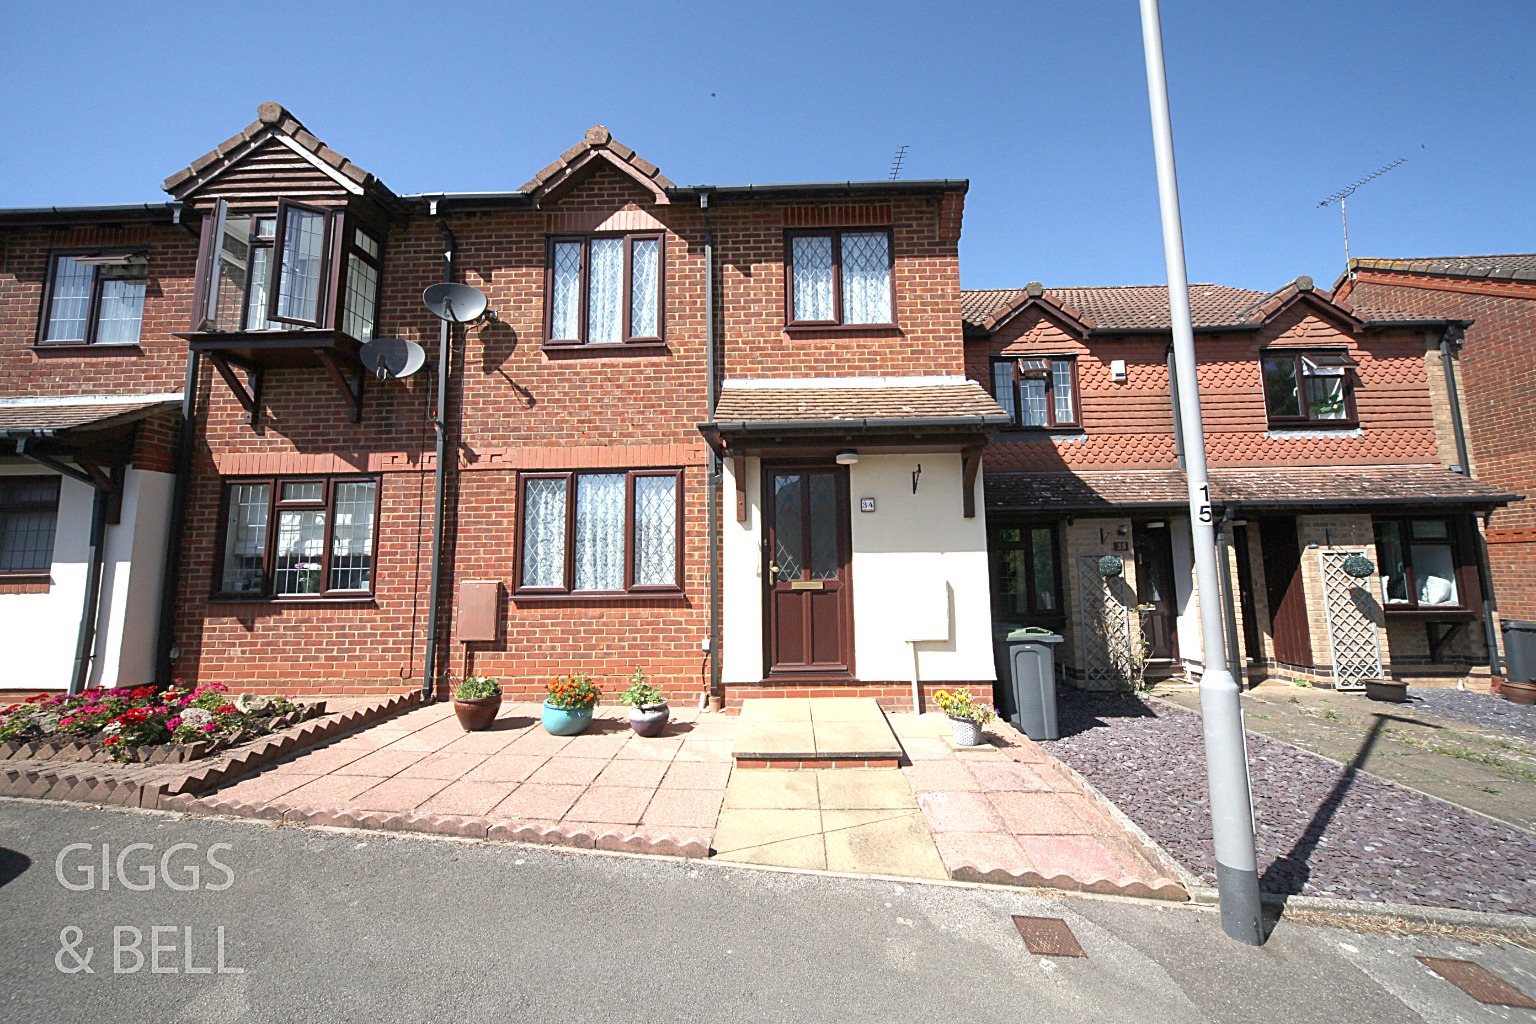 3 bed terraced house for sale in Malthouse Green, Luton - Property Image 1